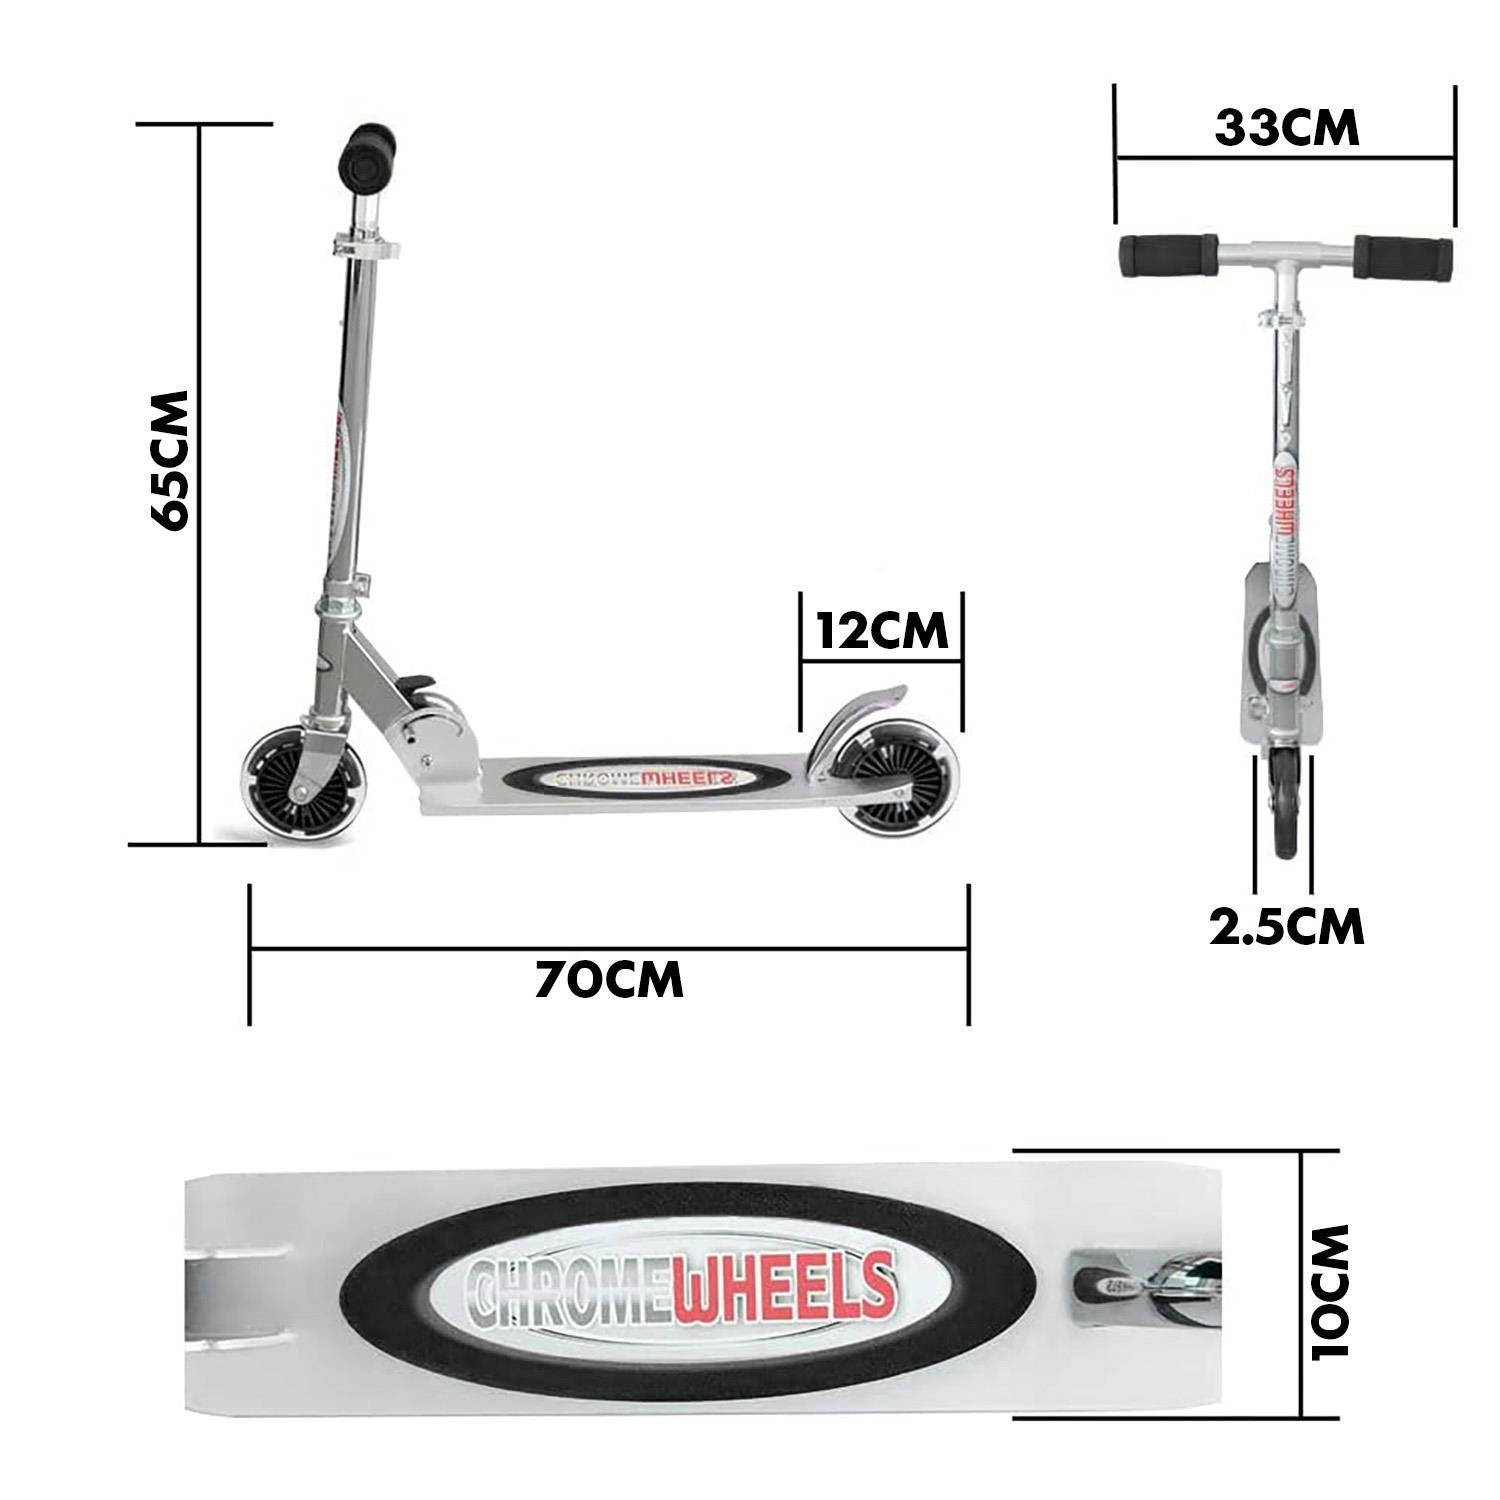 Foldable Kids Scooter Black by The Magic Toy Shop - The Magic Toy Shop